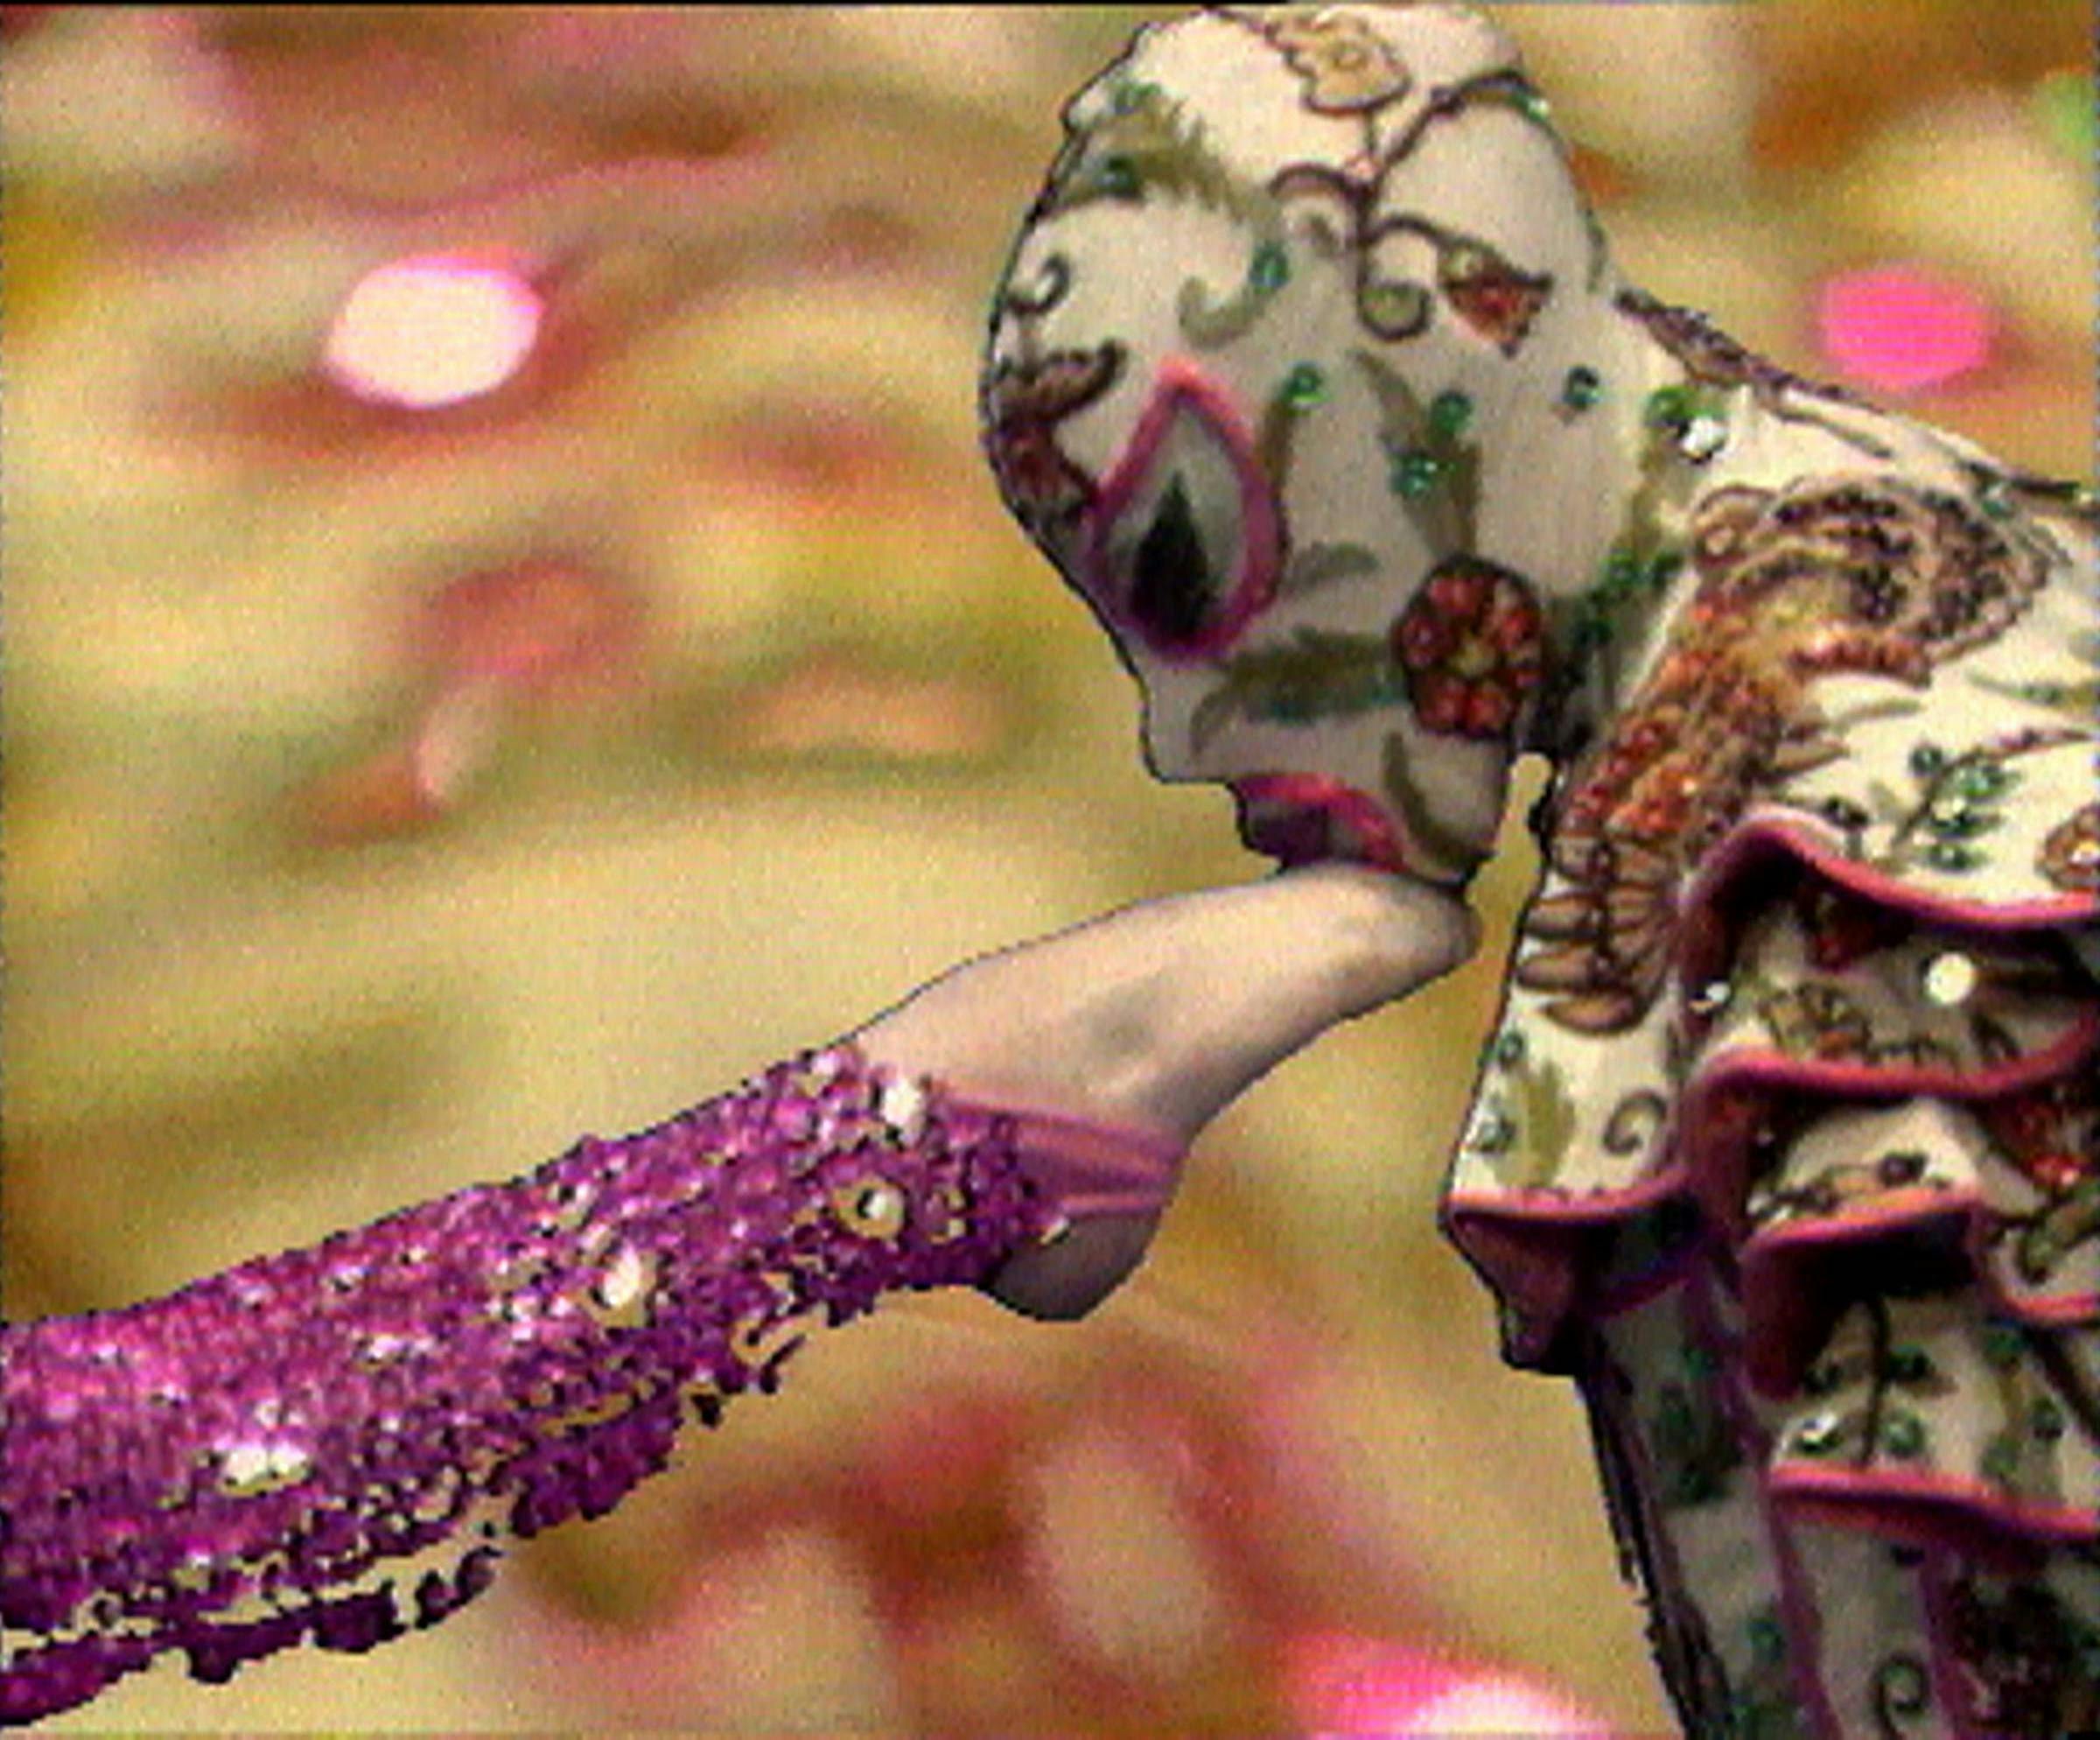 A leg wearing purple sparkly leggings is being kissed by a figure whose face and body and covered in an ornate multicoloured body suit